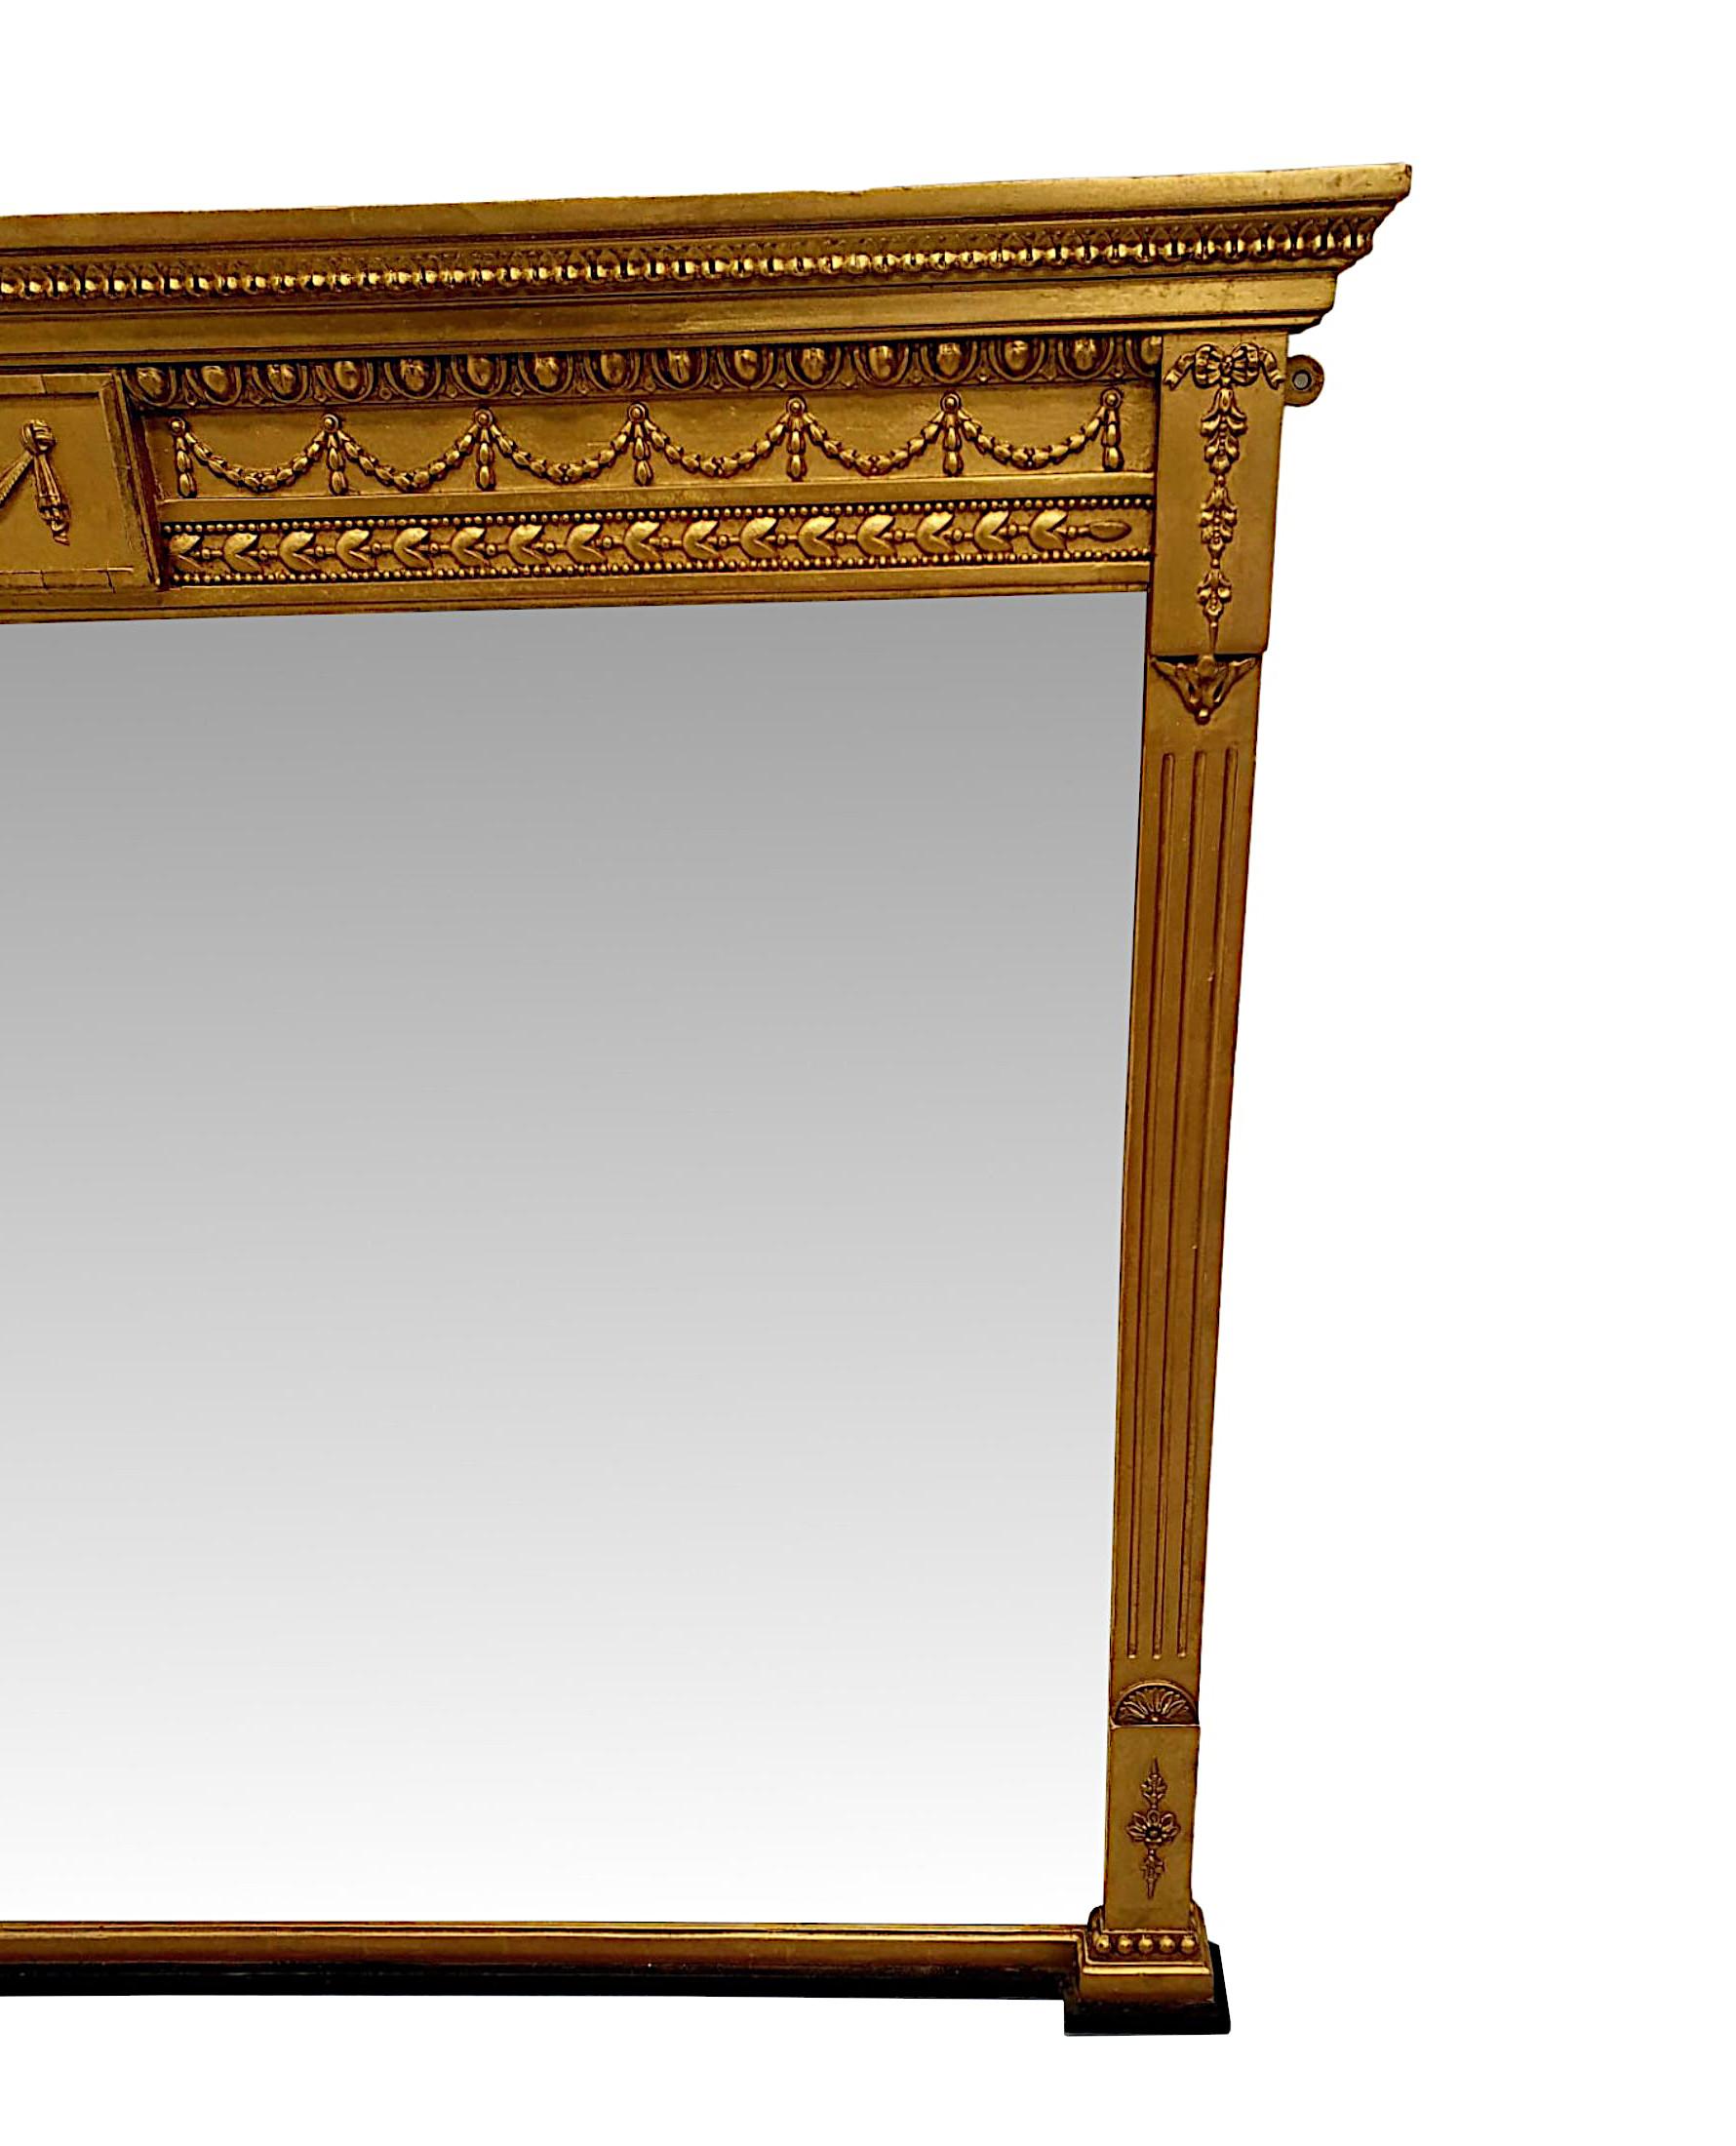 A fabulous Edwardian hall or overmantle mirror in the manner of Adams, of neat proportions and gorgeous quality.  The finely carved, fluted and moulded giltwood frame is surmounted with an overhanging stepped cornice above a panelled frieze with